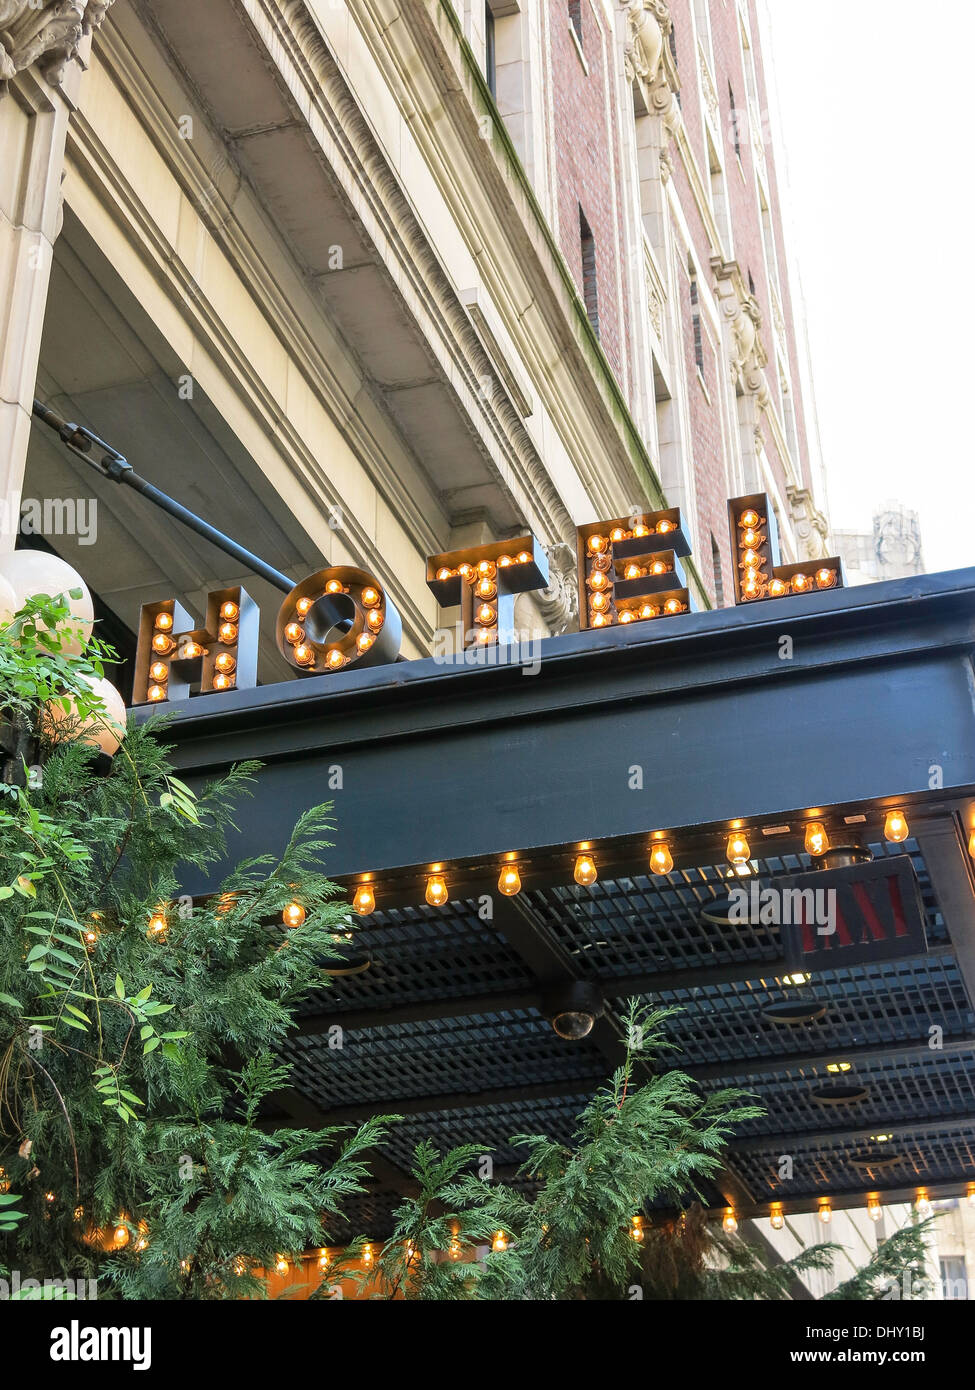 Ace Hotel Marquee, 20 West 29th Street, Chelsea, NYC Stock Photo